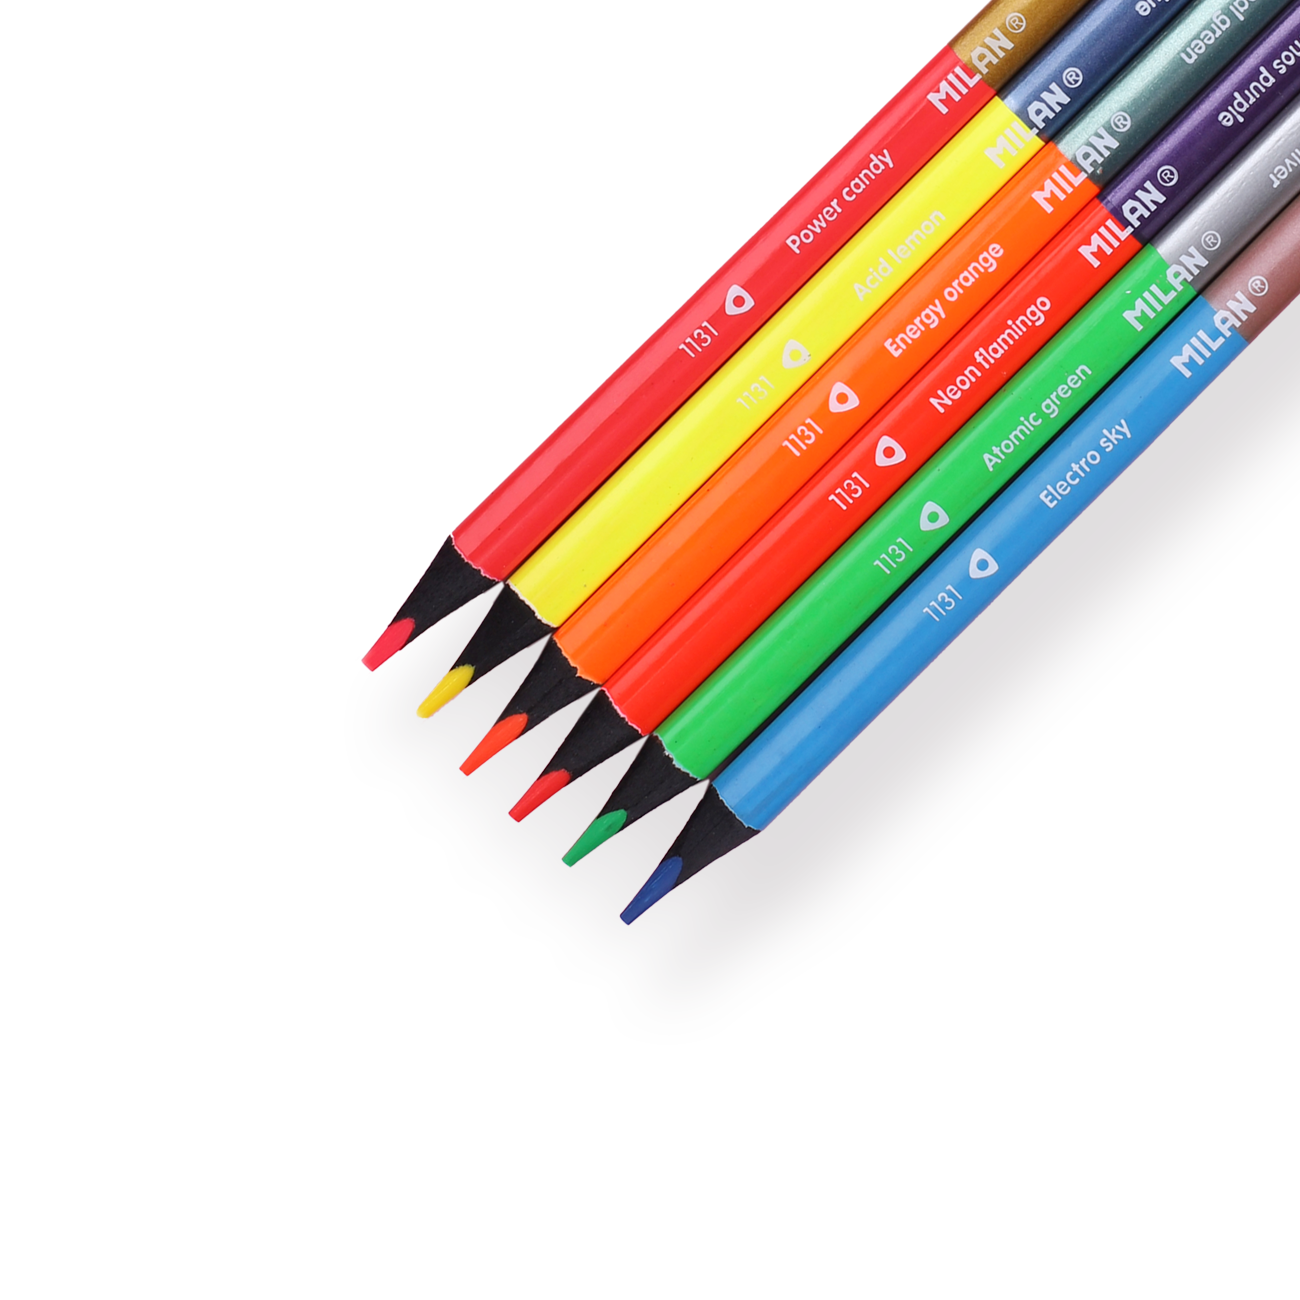 Neon Colored Pencil Set with Pencil Sharpener